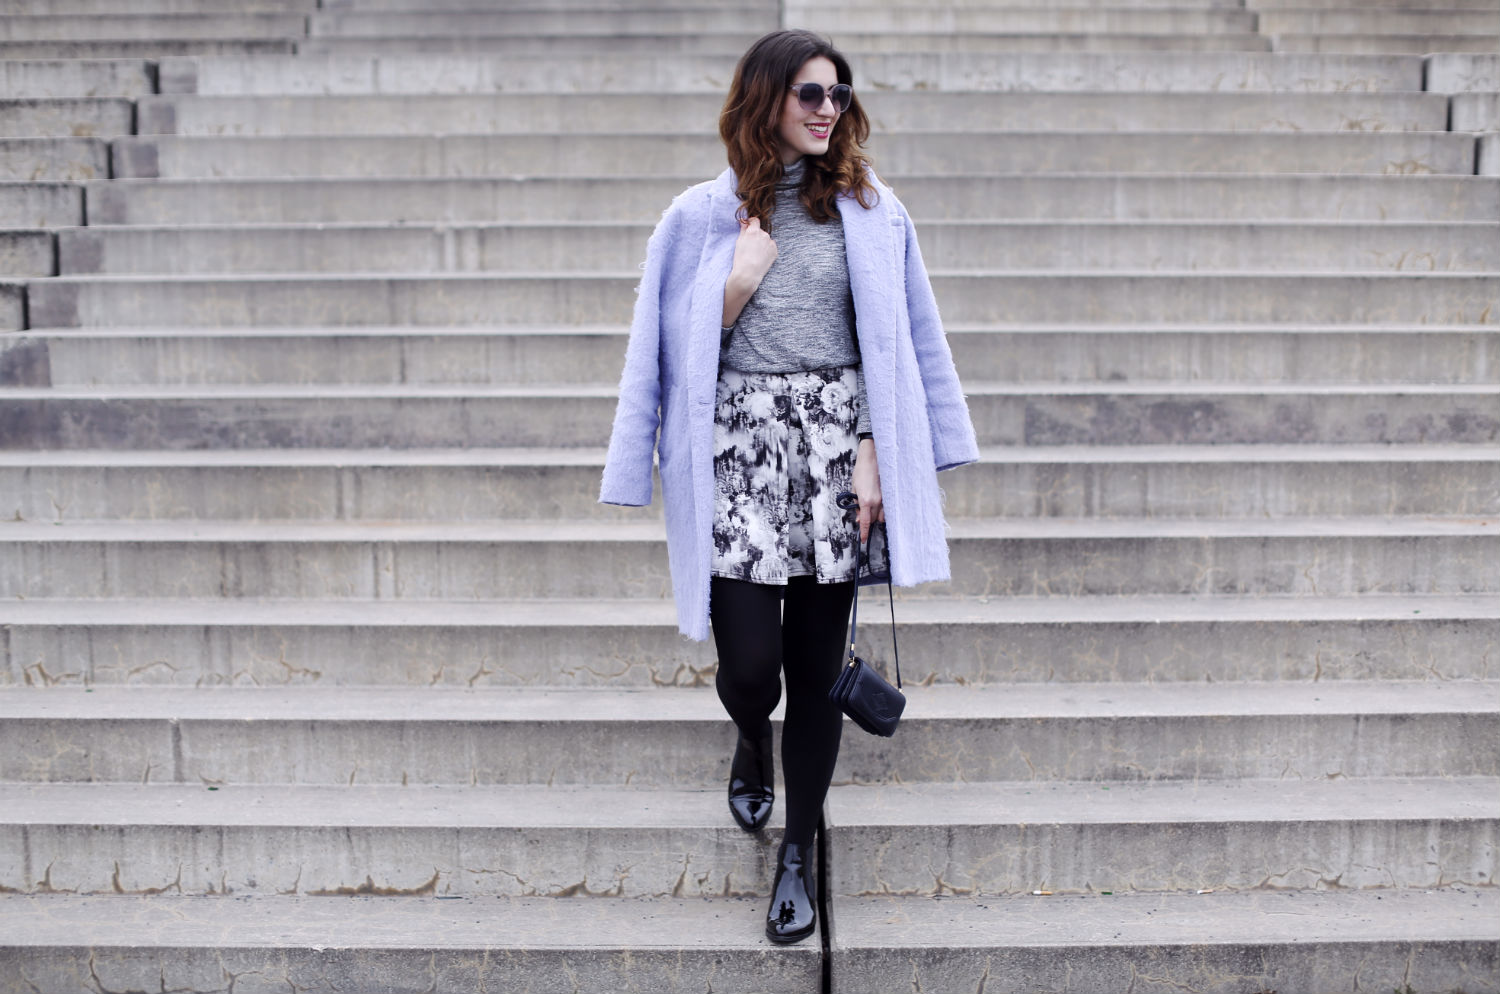 lilac coat serenity pantone outfit zara turtle neck shirt oh my love skater skirt vintage bag pointed boots patent leather sacha shoes